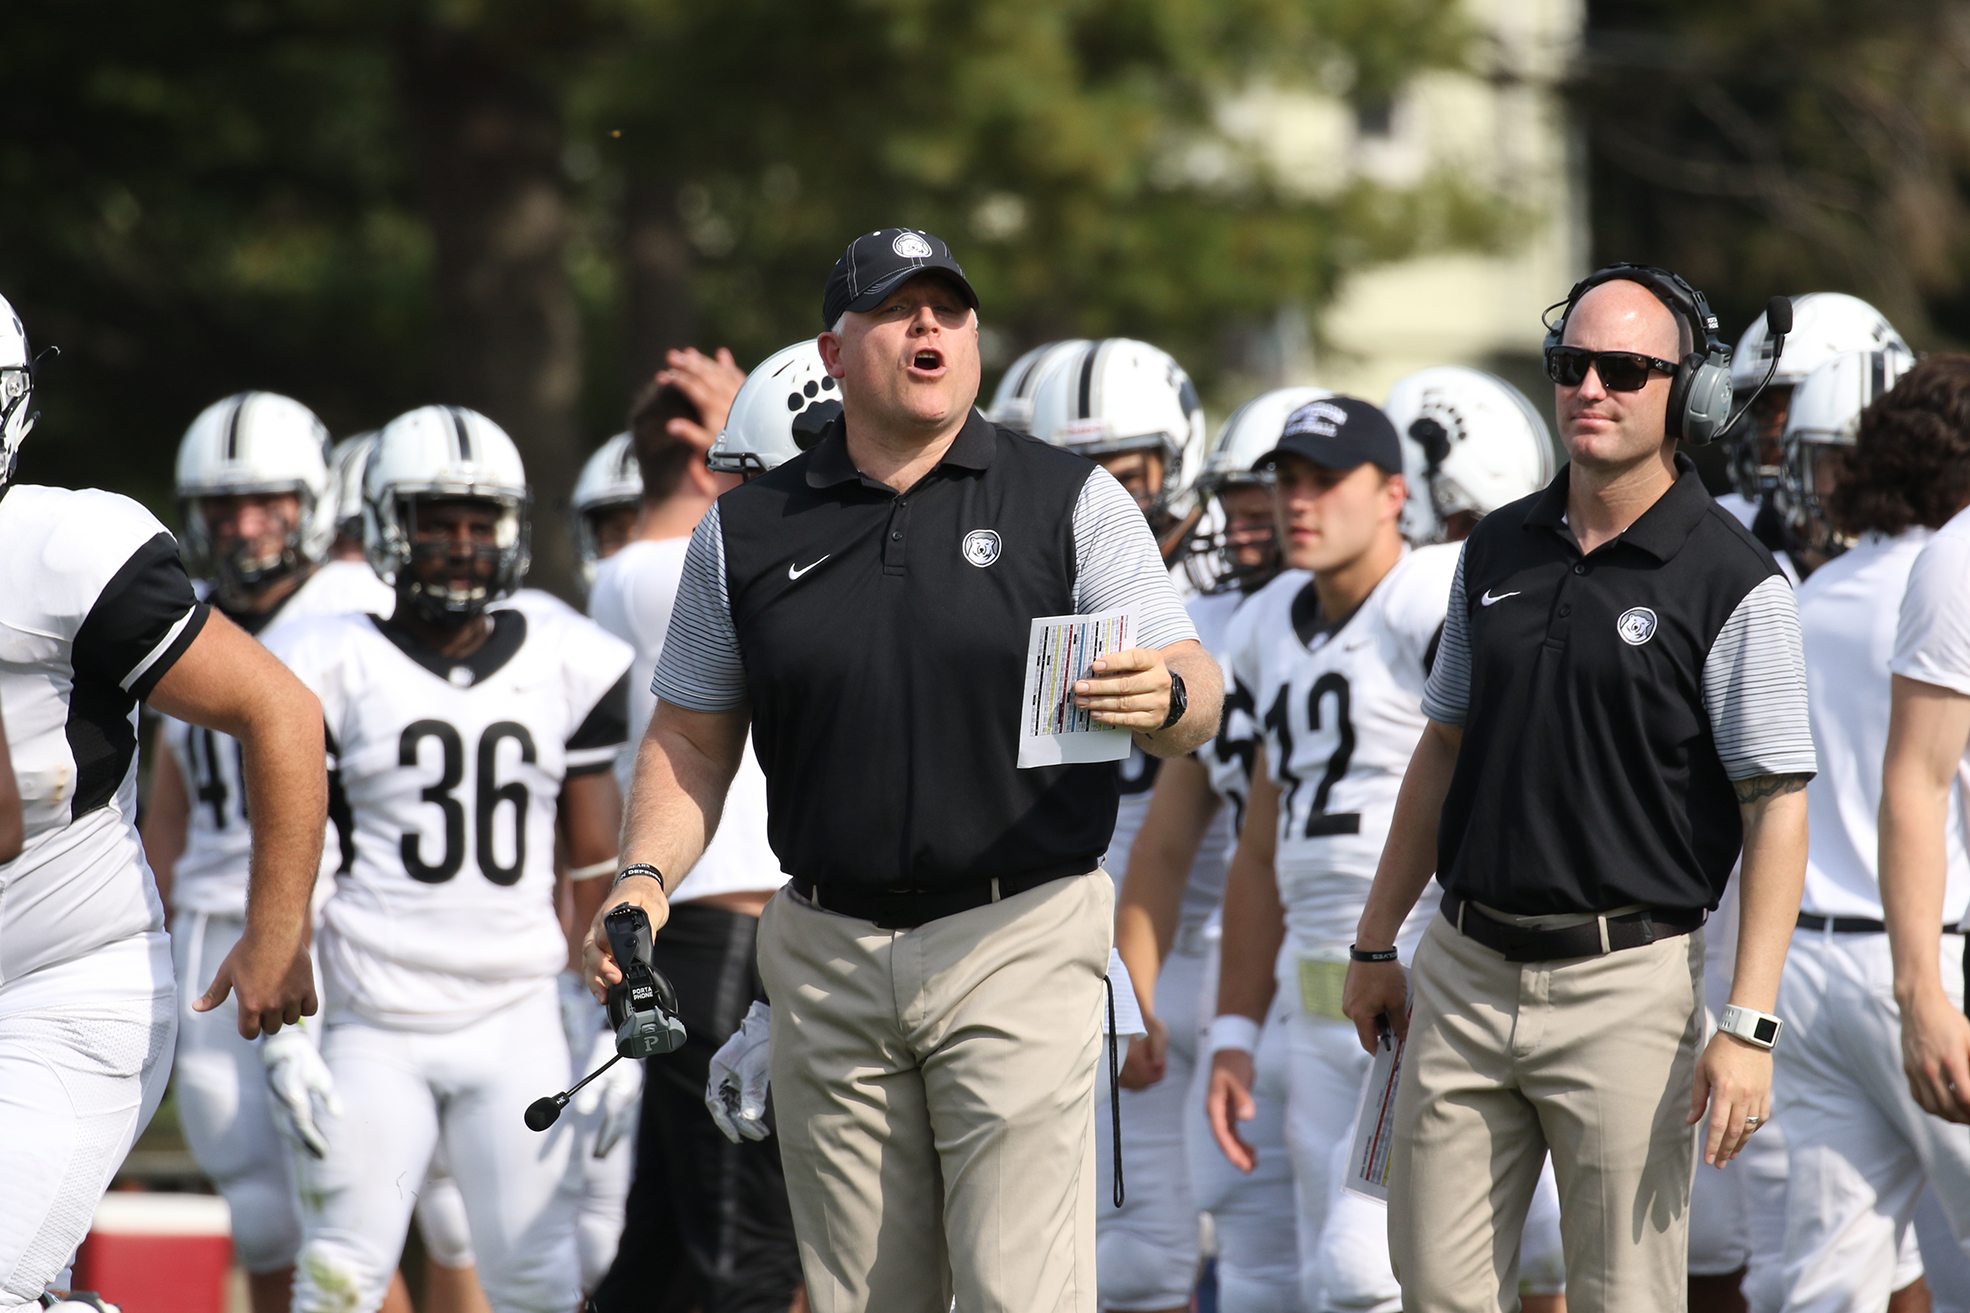 Head football coach leaves college with 3-31 record – The Bowdoin